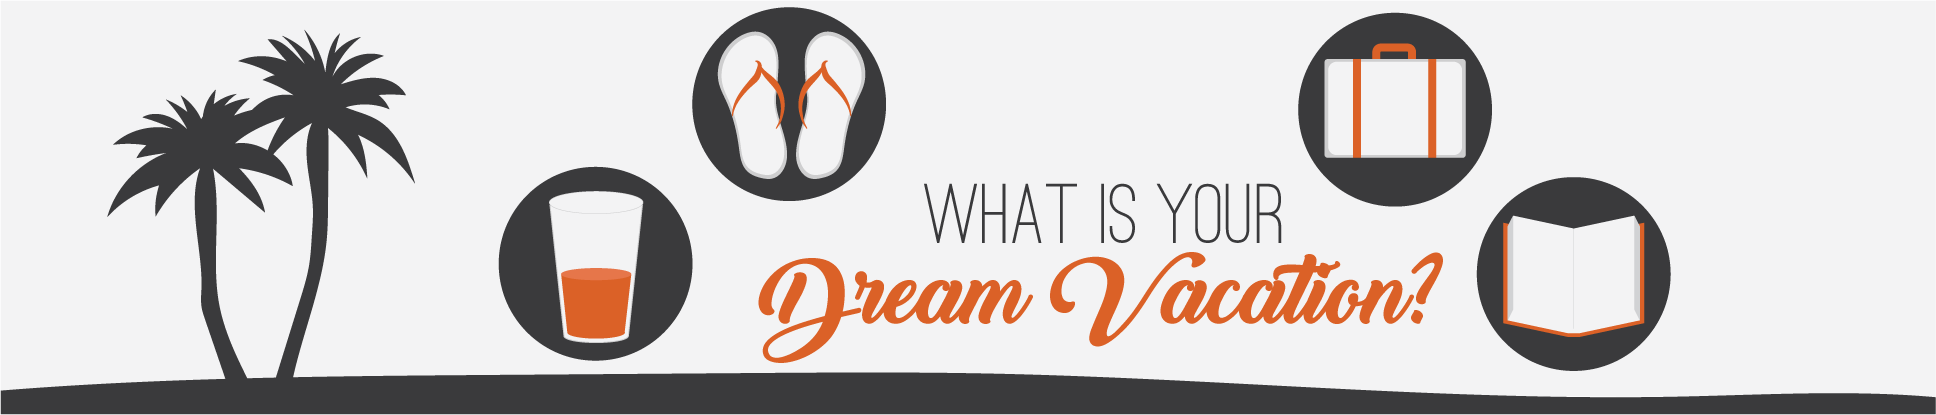 What is your dream vacation?